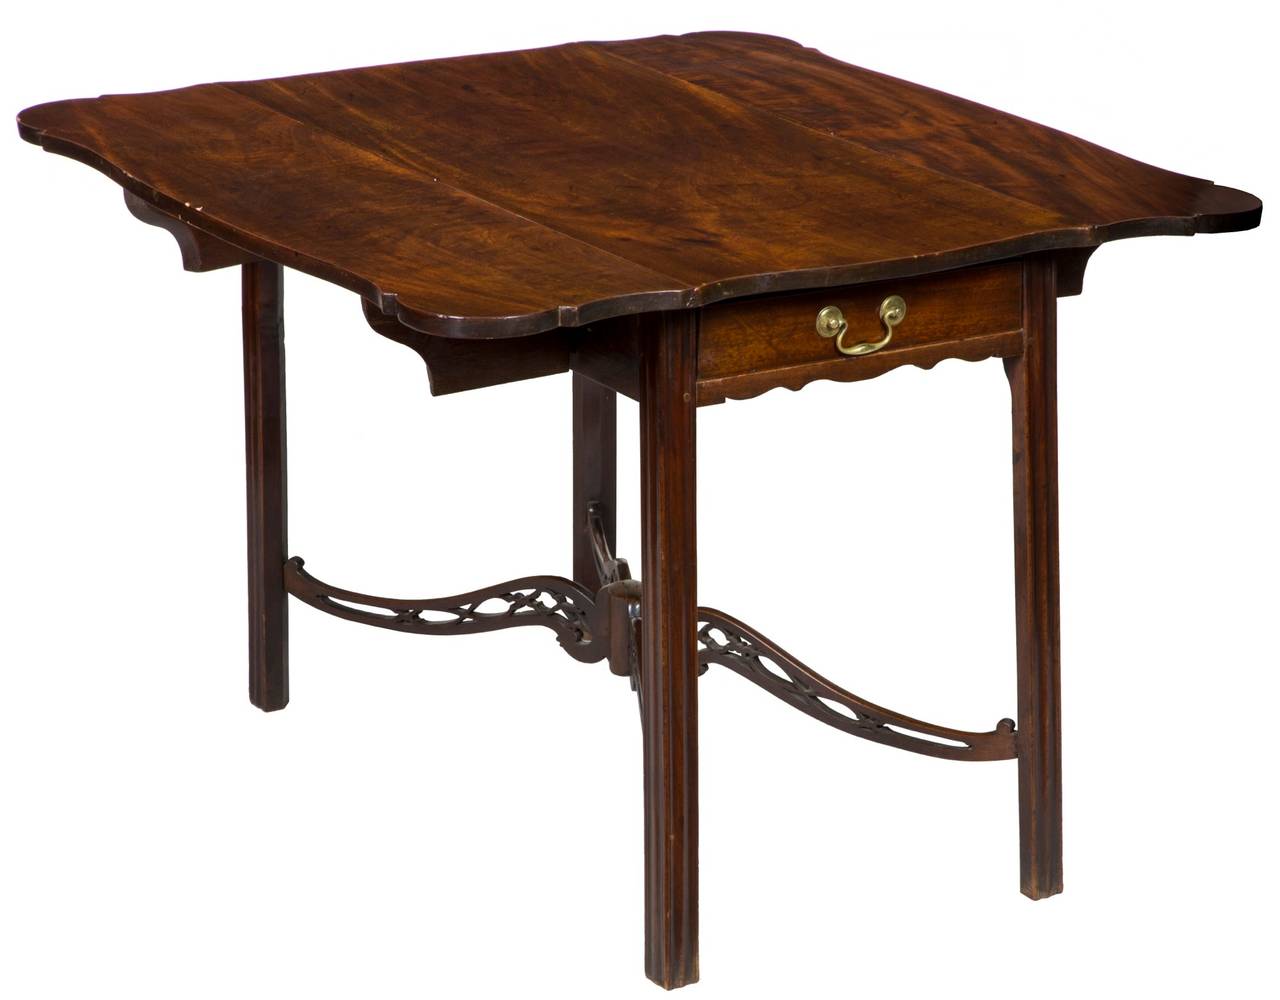 This impressive pembroke is large in scale, enough to accommodate four people that would enjoy seeing the great figured solid Cuban mahogany with rare porringer ends. This table speaks of quality and development throughout. For example, see the